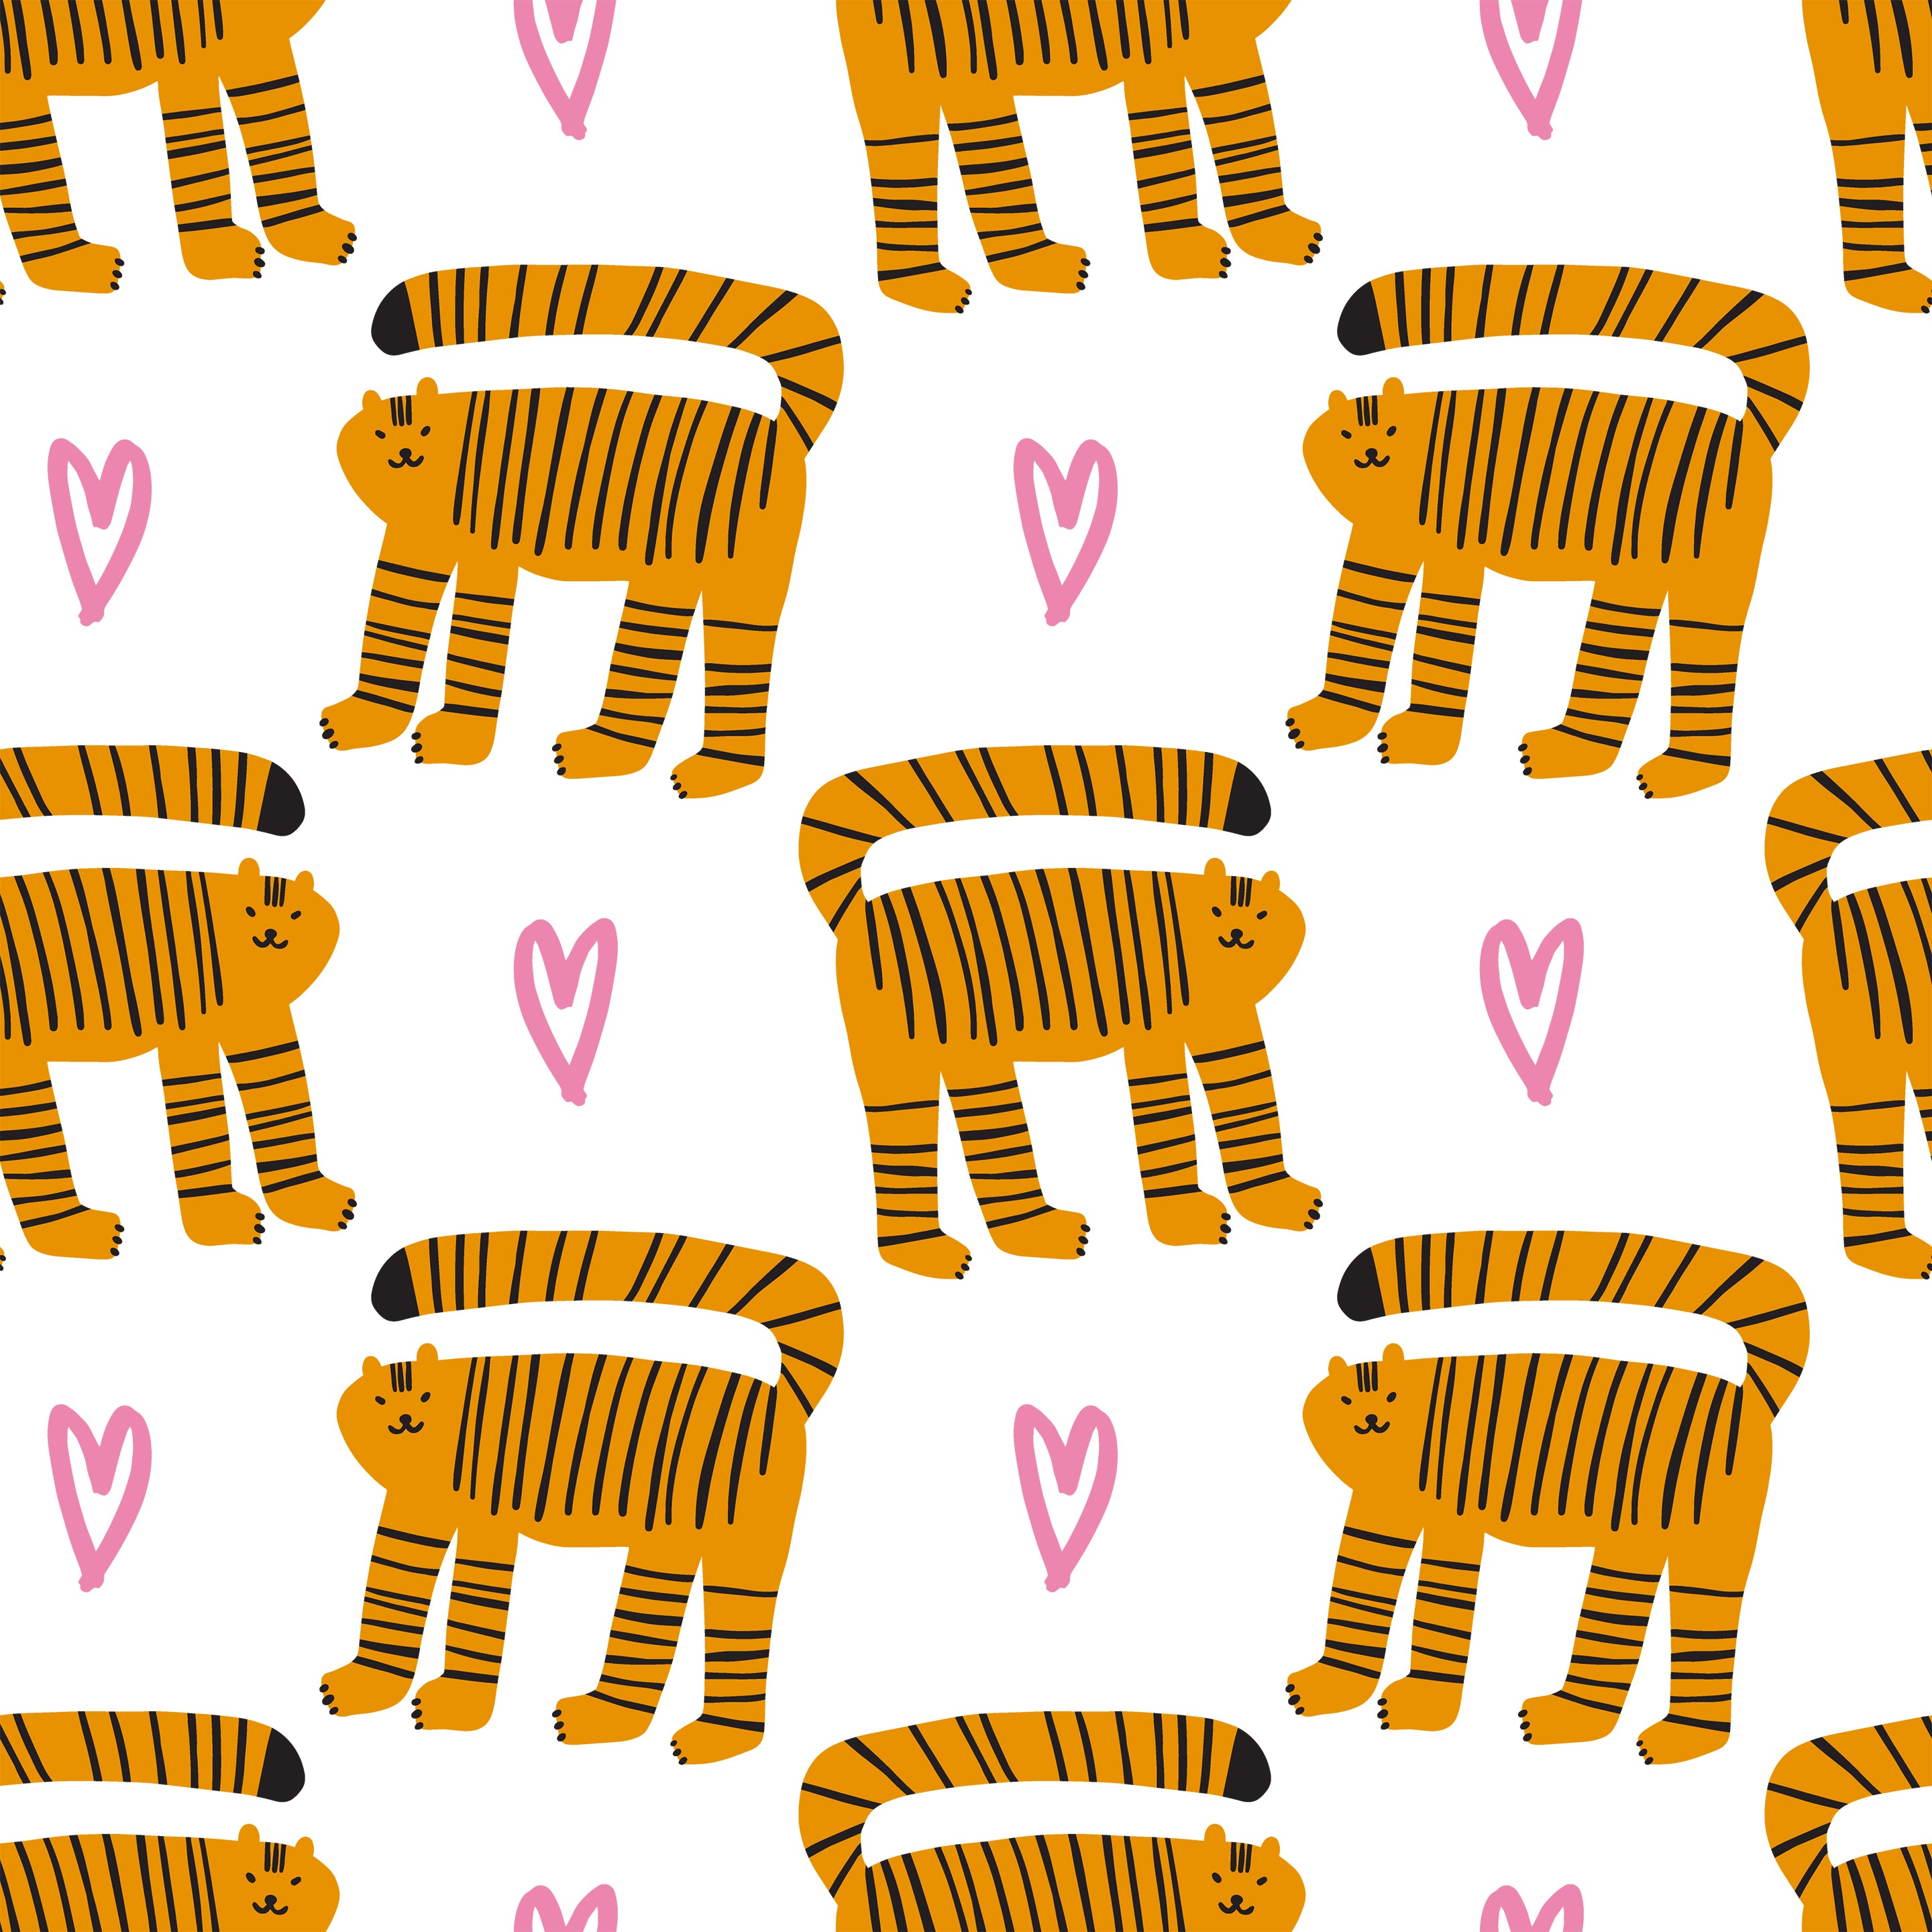 A cheerful pattern of orange striped cats in various playful poses, interspersed with pink hearts on a white background. This 'Cats Wallpaper 4' adds a whimsical and joyous atmosphere, suitable for children's rooms or casual living spaces